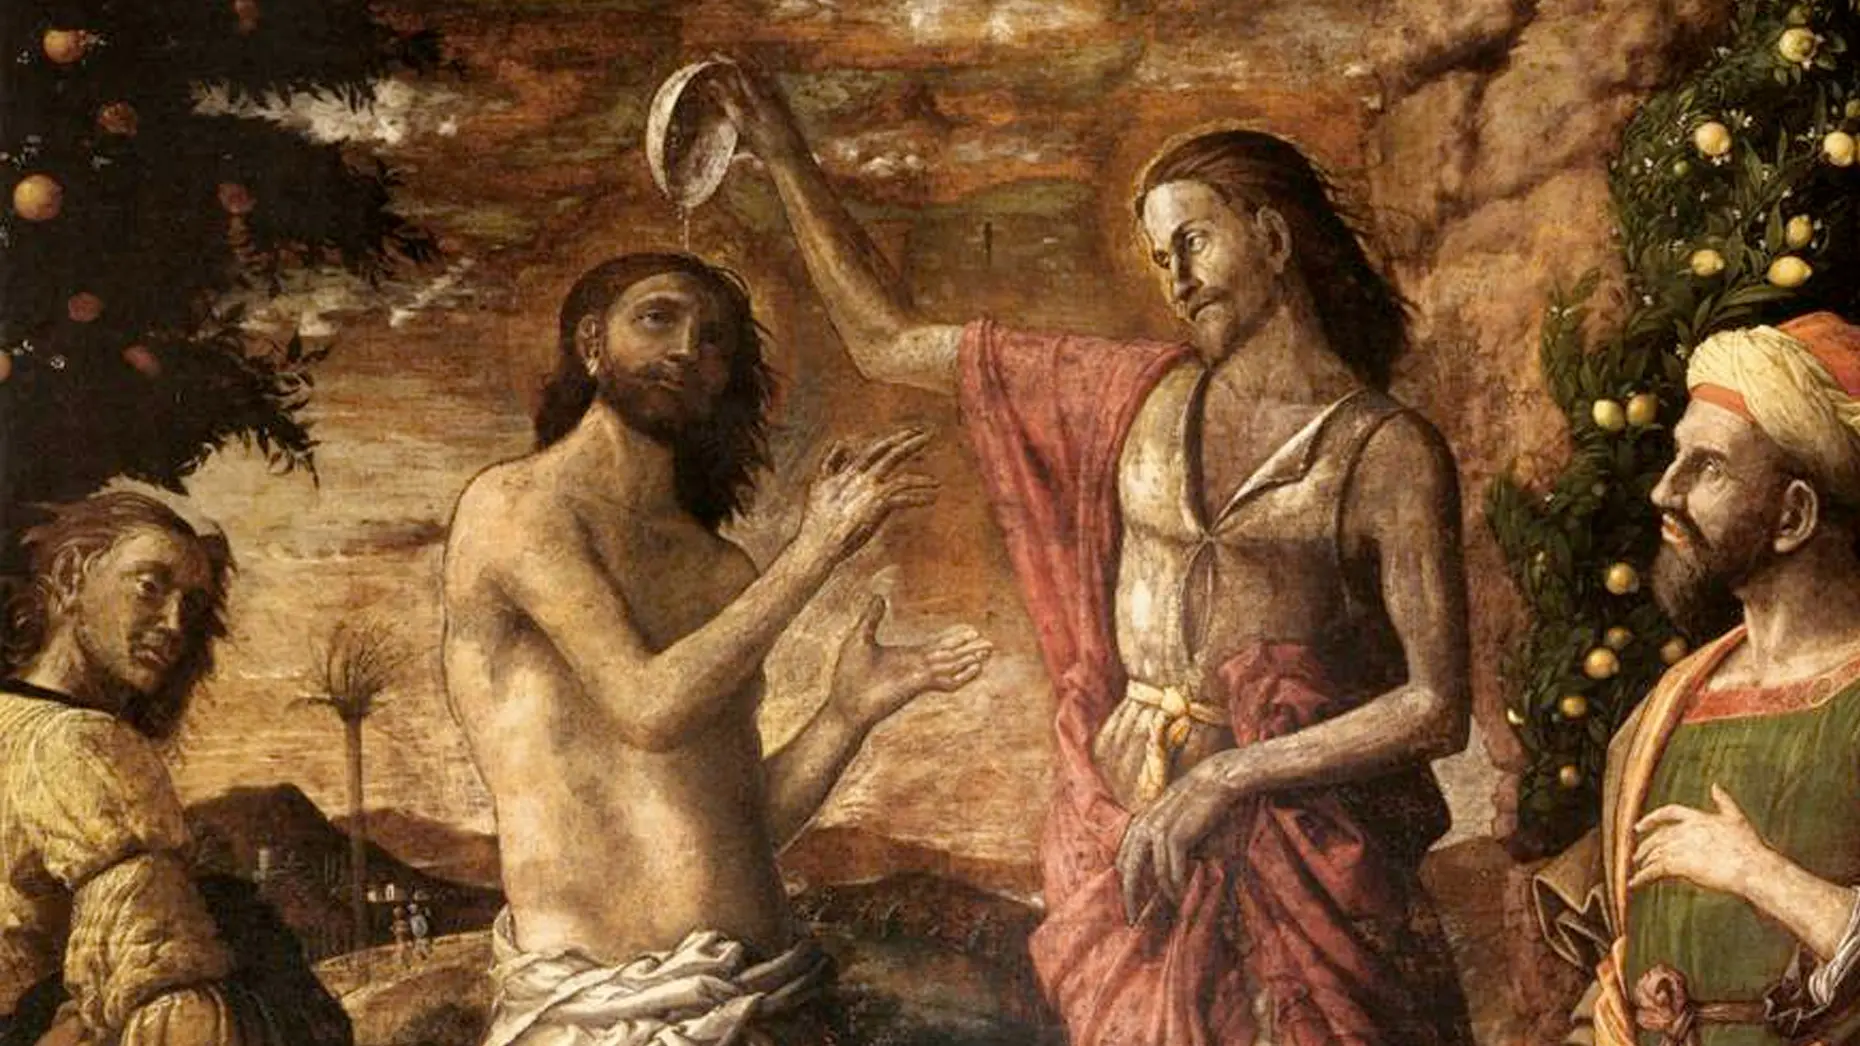 Painting of the Baptism of Jesus by Mategna